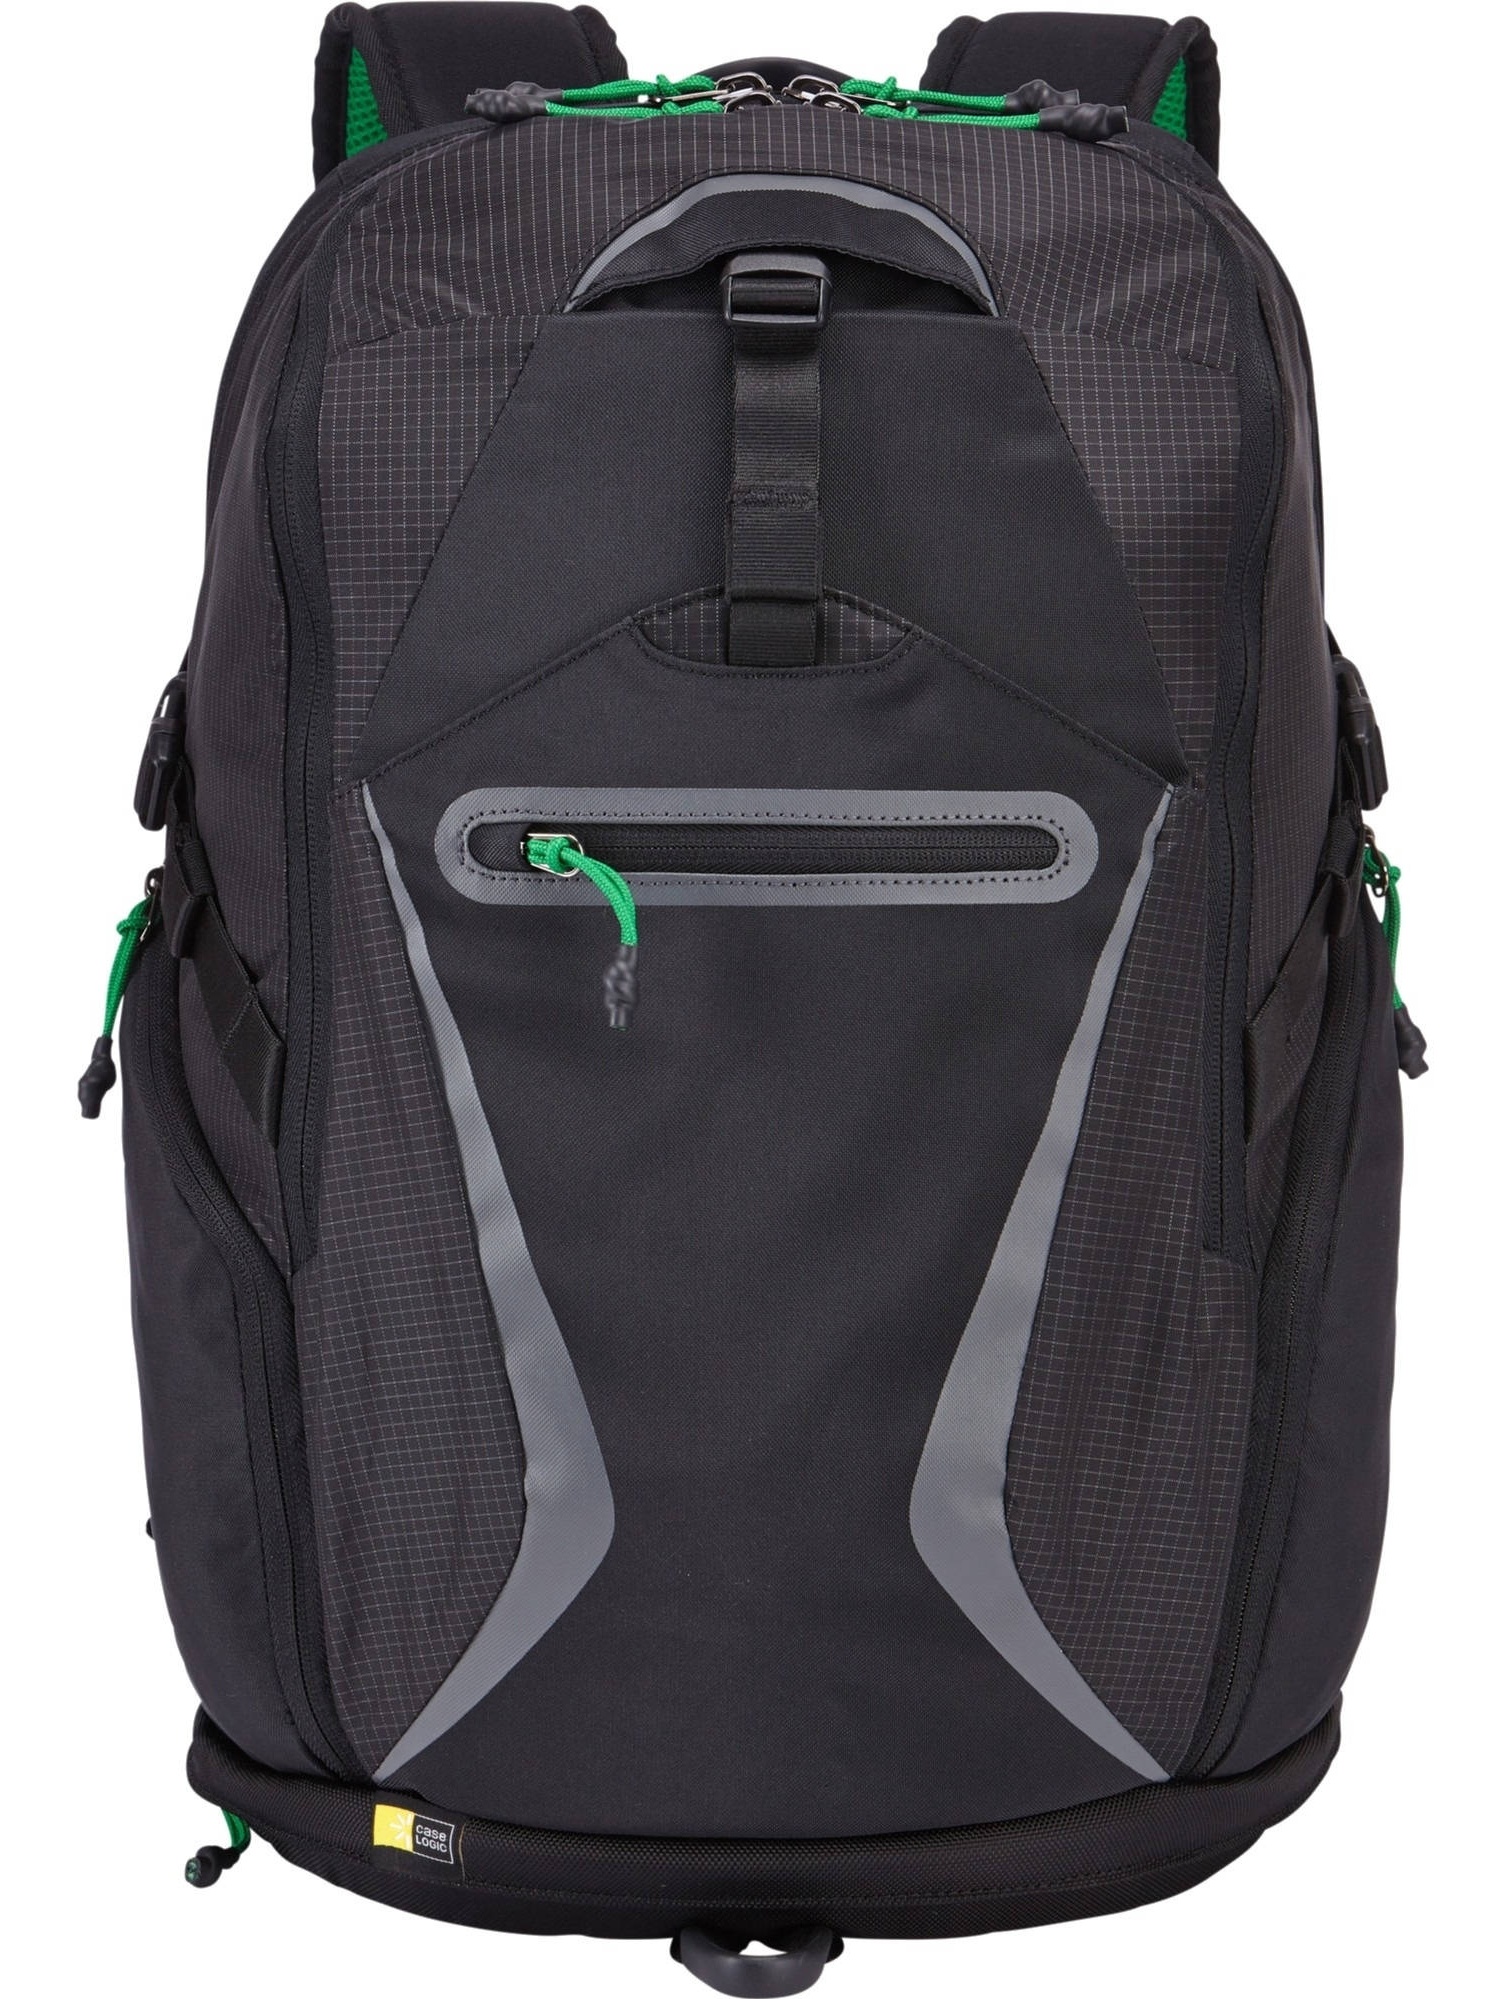 BOGB-115 Griffith Park Laptop and Tablet Backpack, Choose Your Color - image 2 of 5